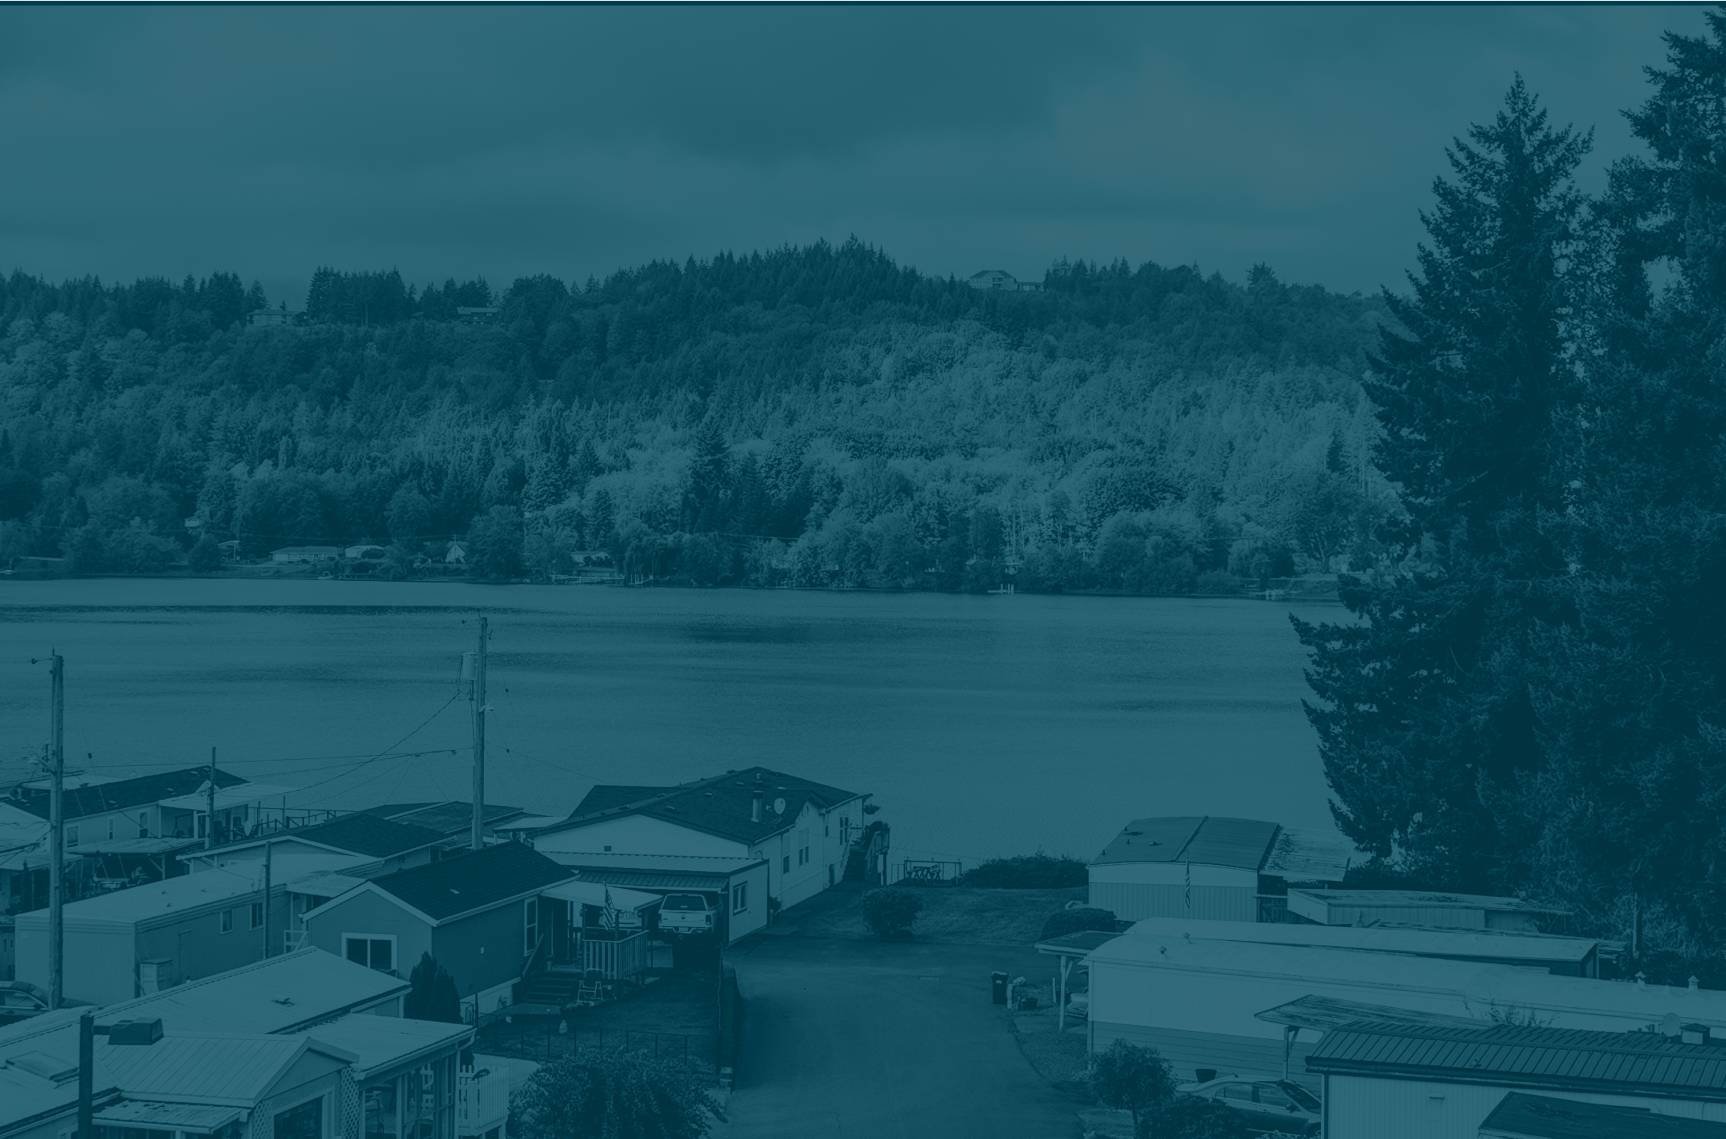 Photo of a manufactured home community on lake with mountains in the background